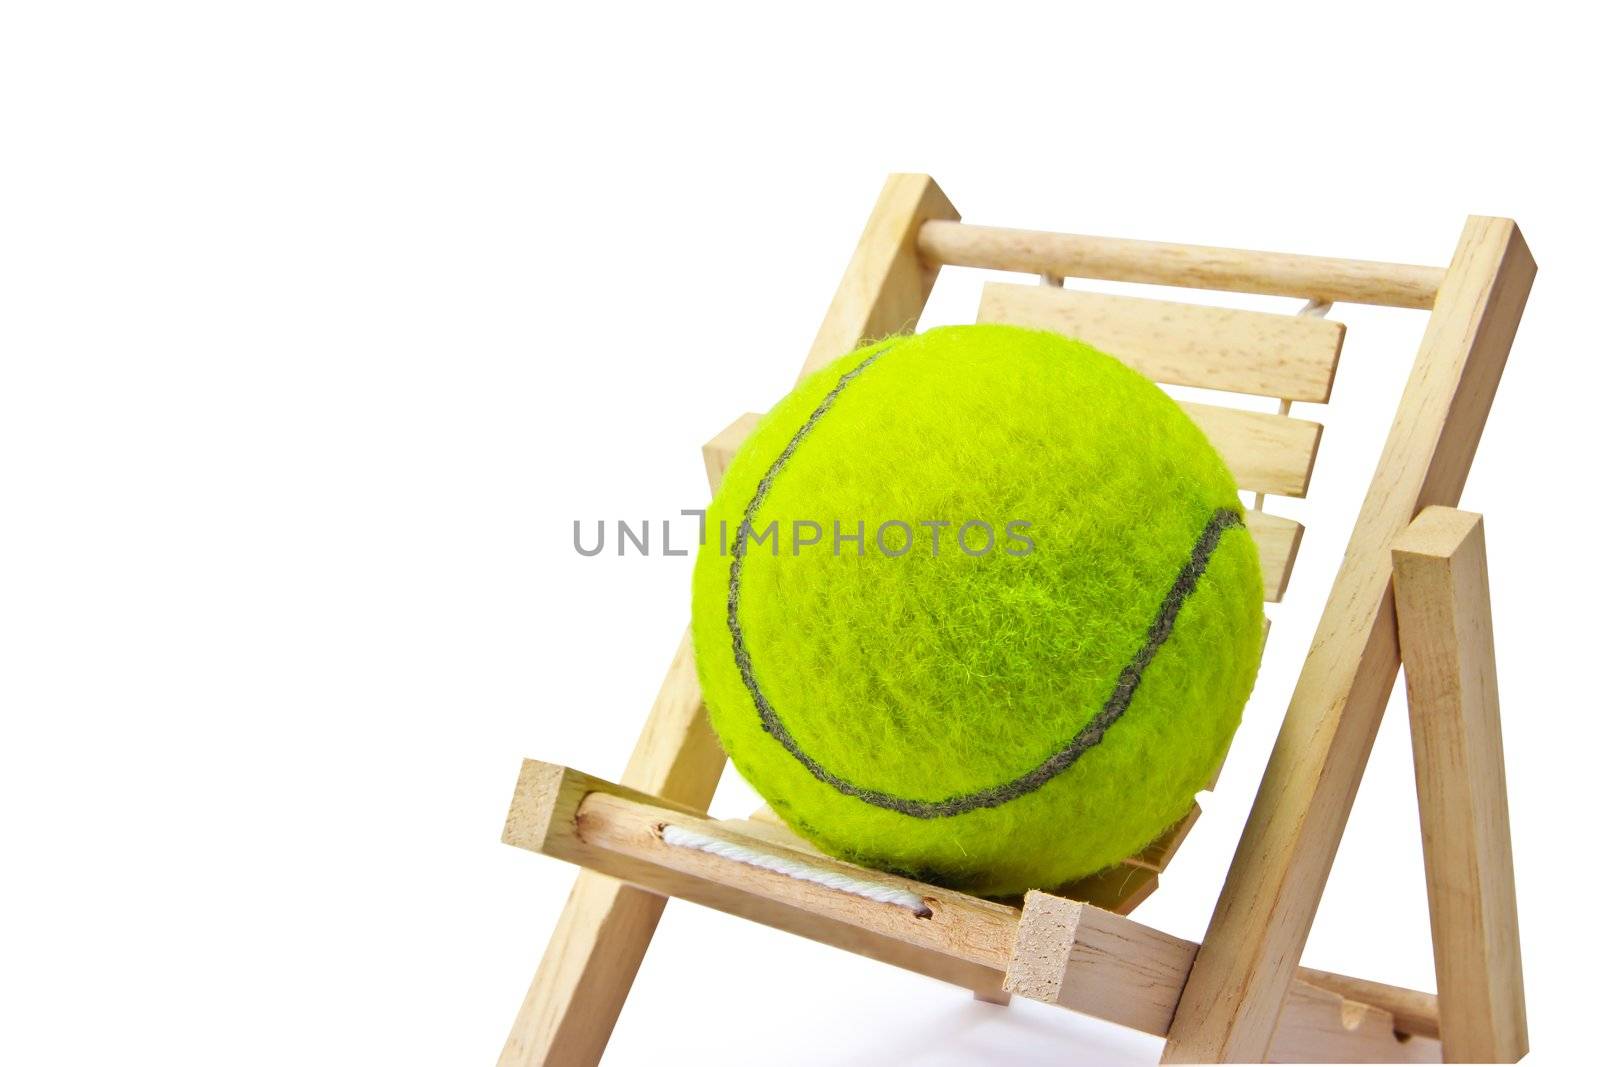 Tennis on the chair by Myimagine